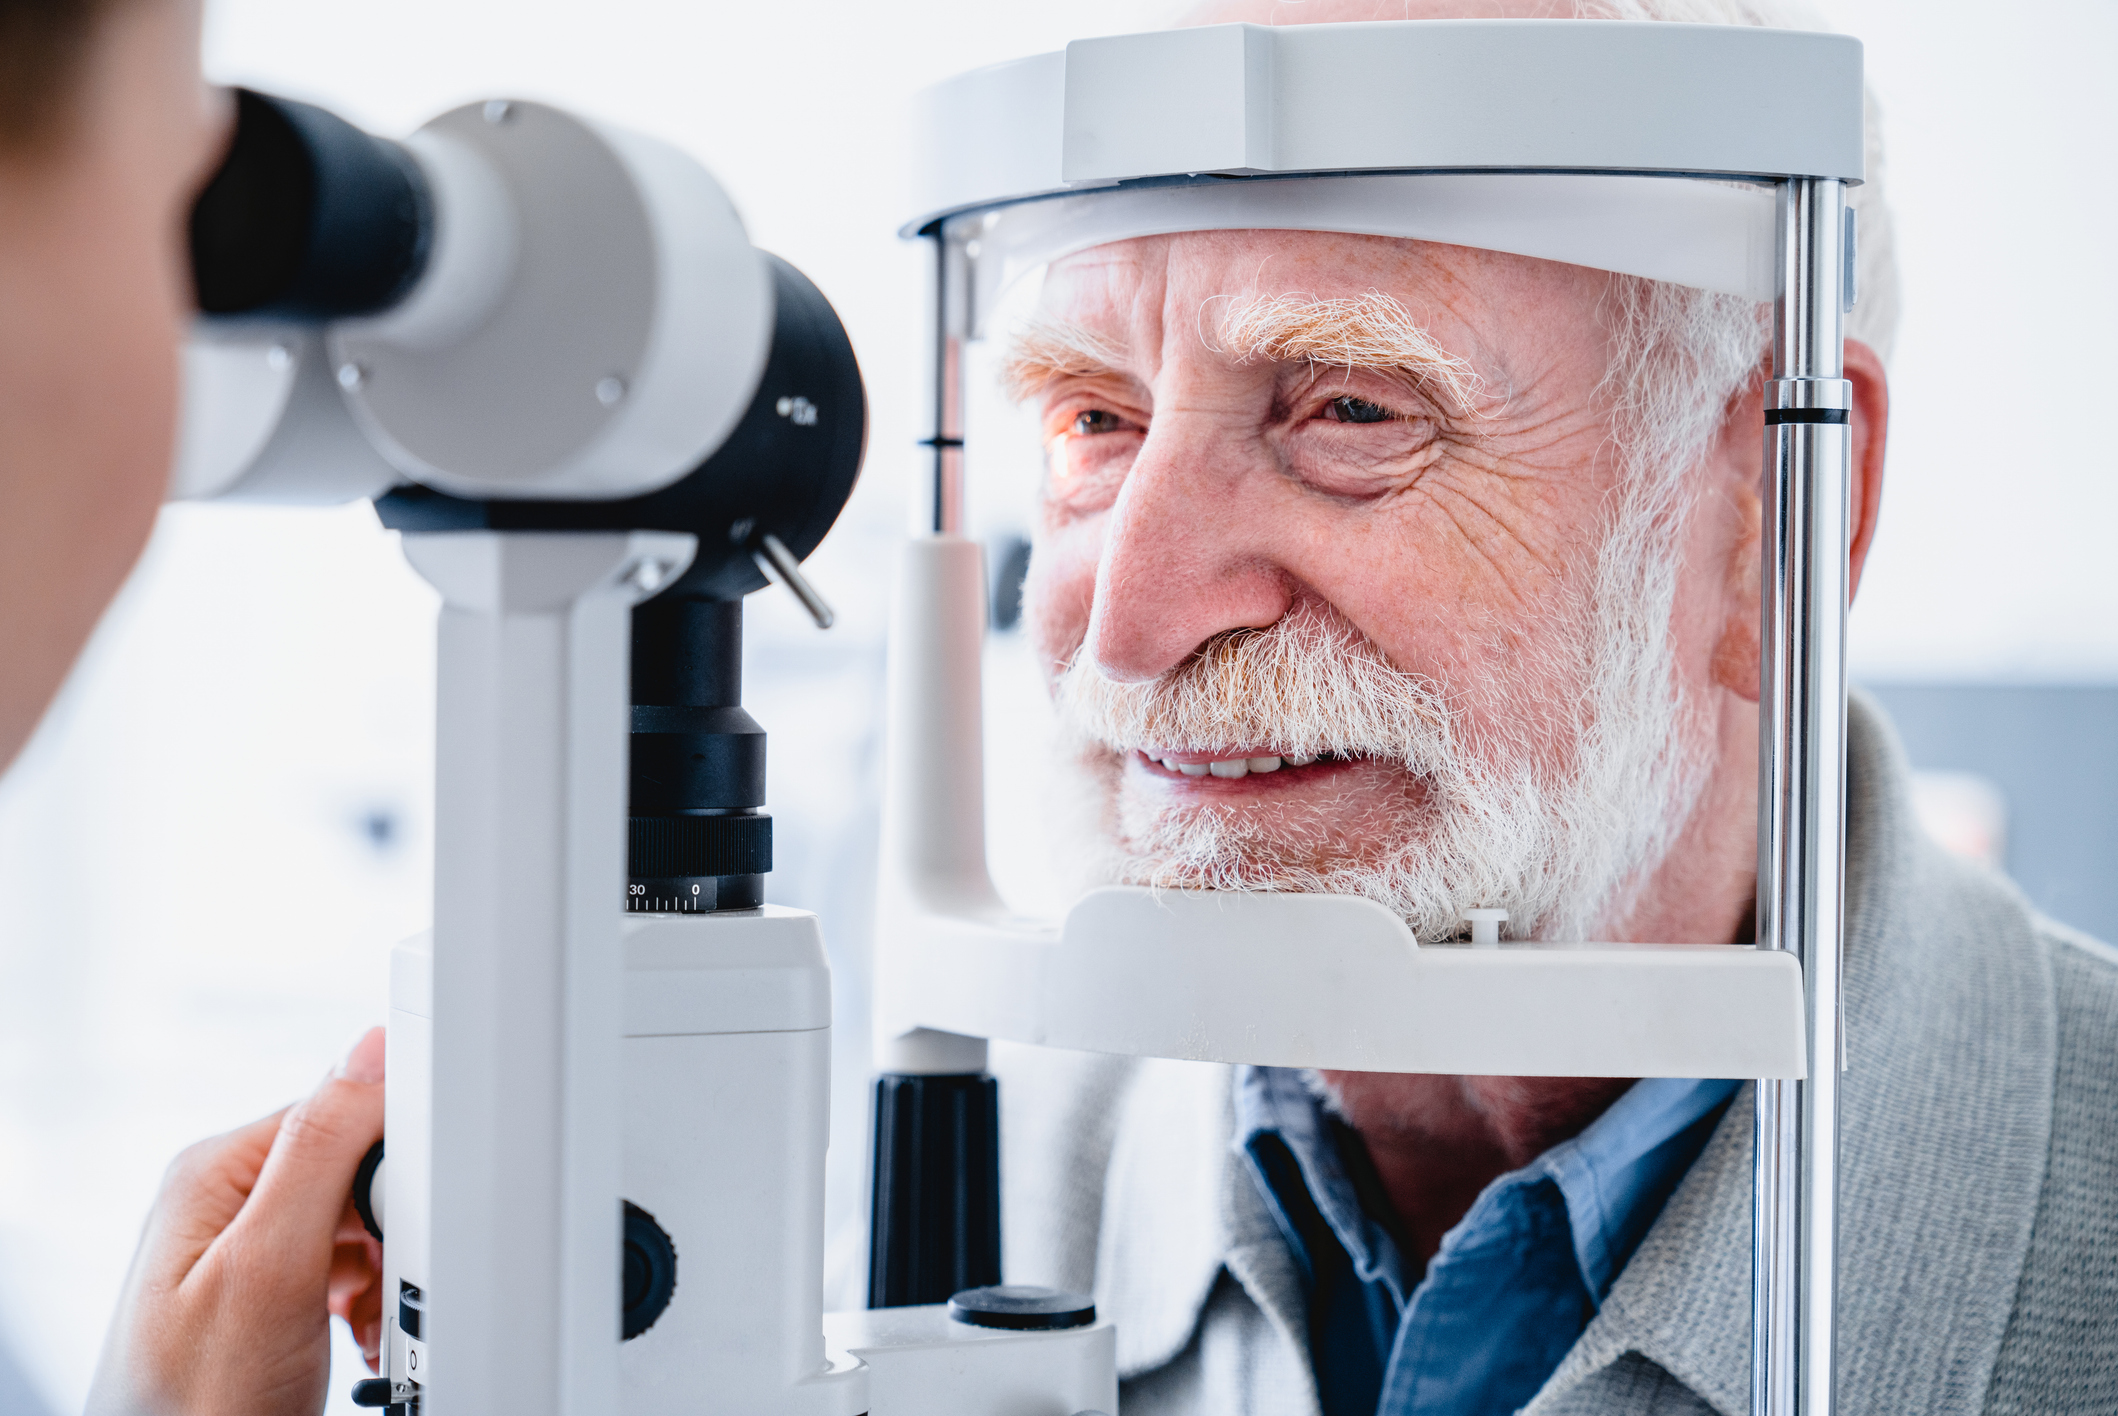 Learn the Basics of Glaucoma to Prevent Future Blindness